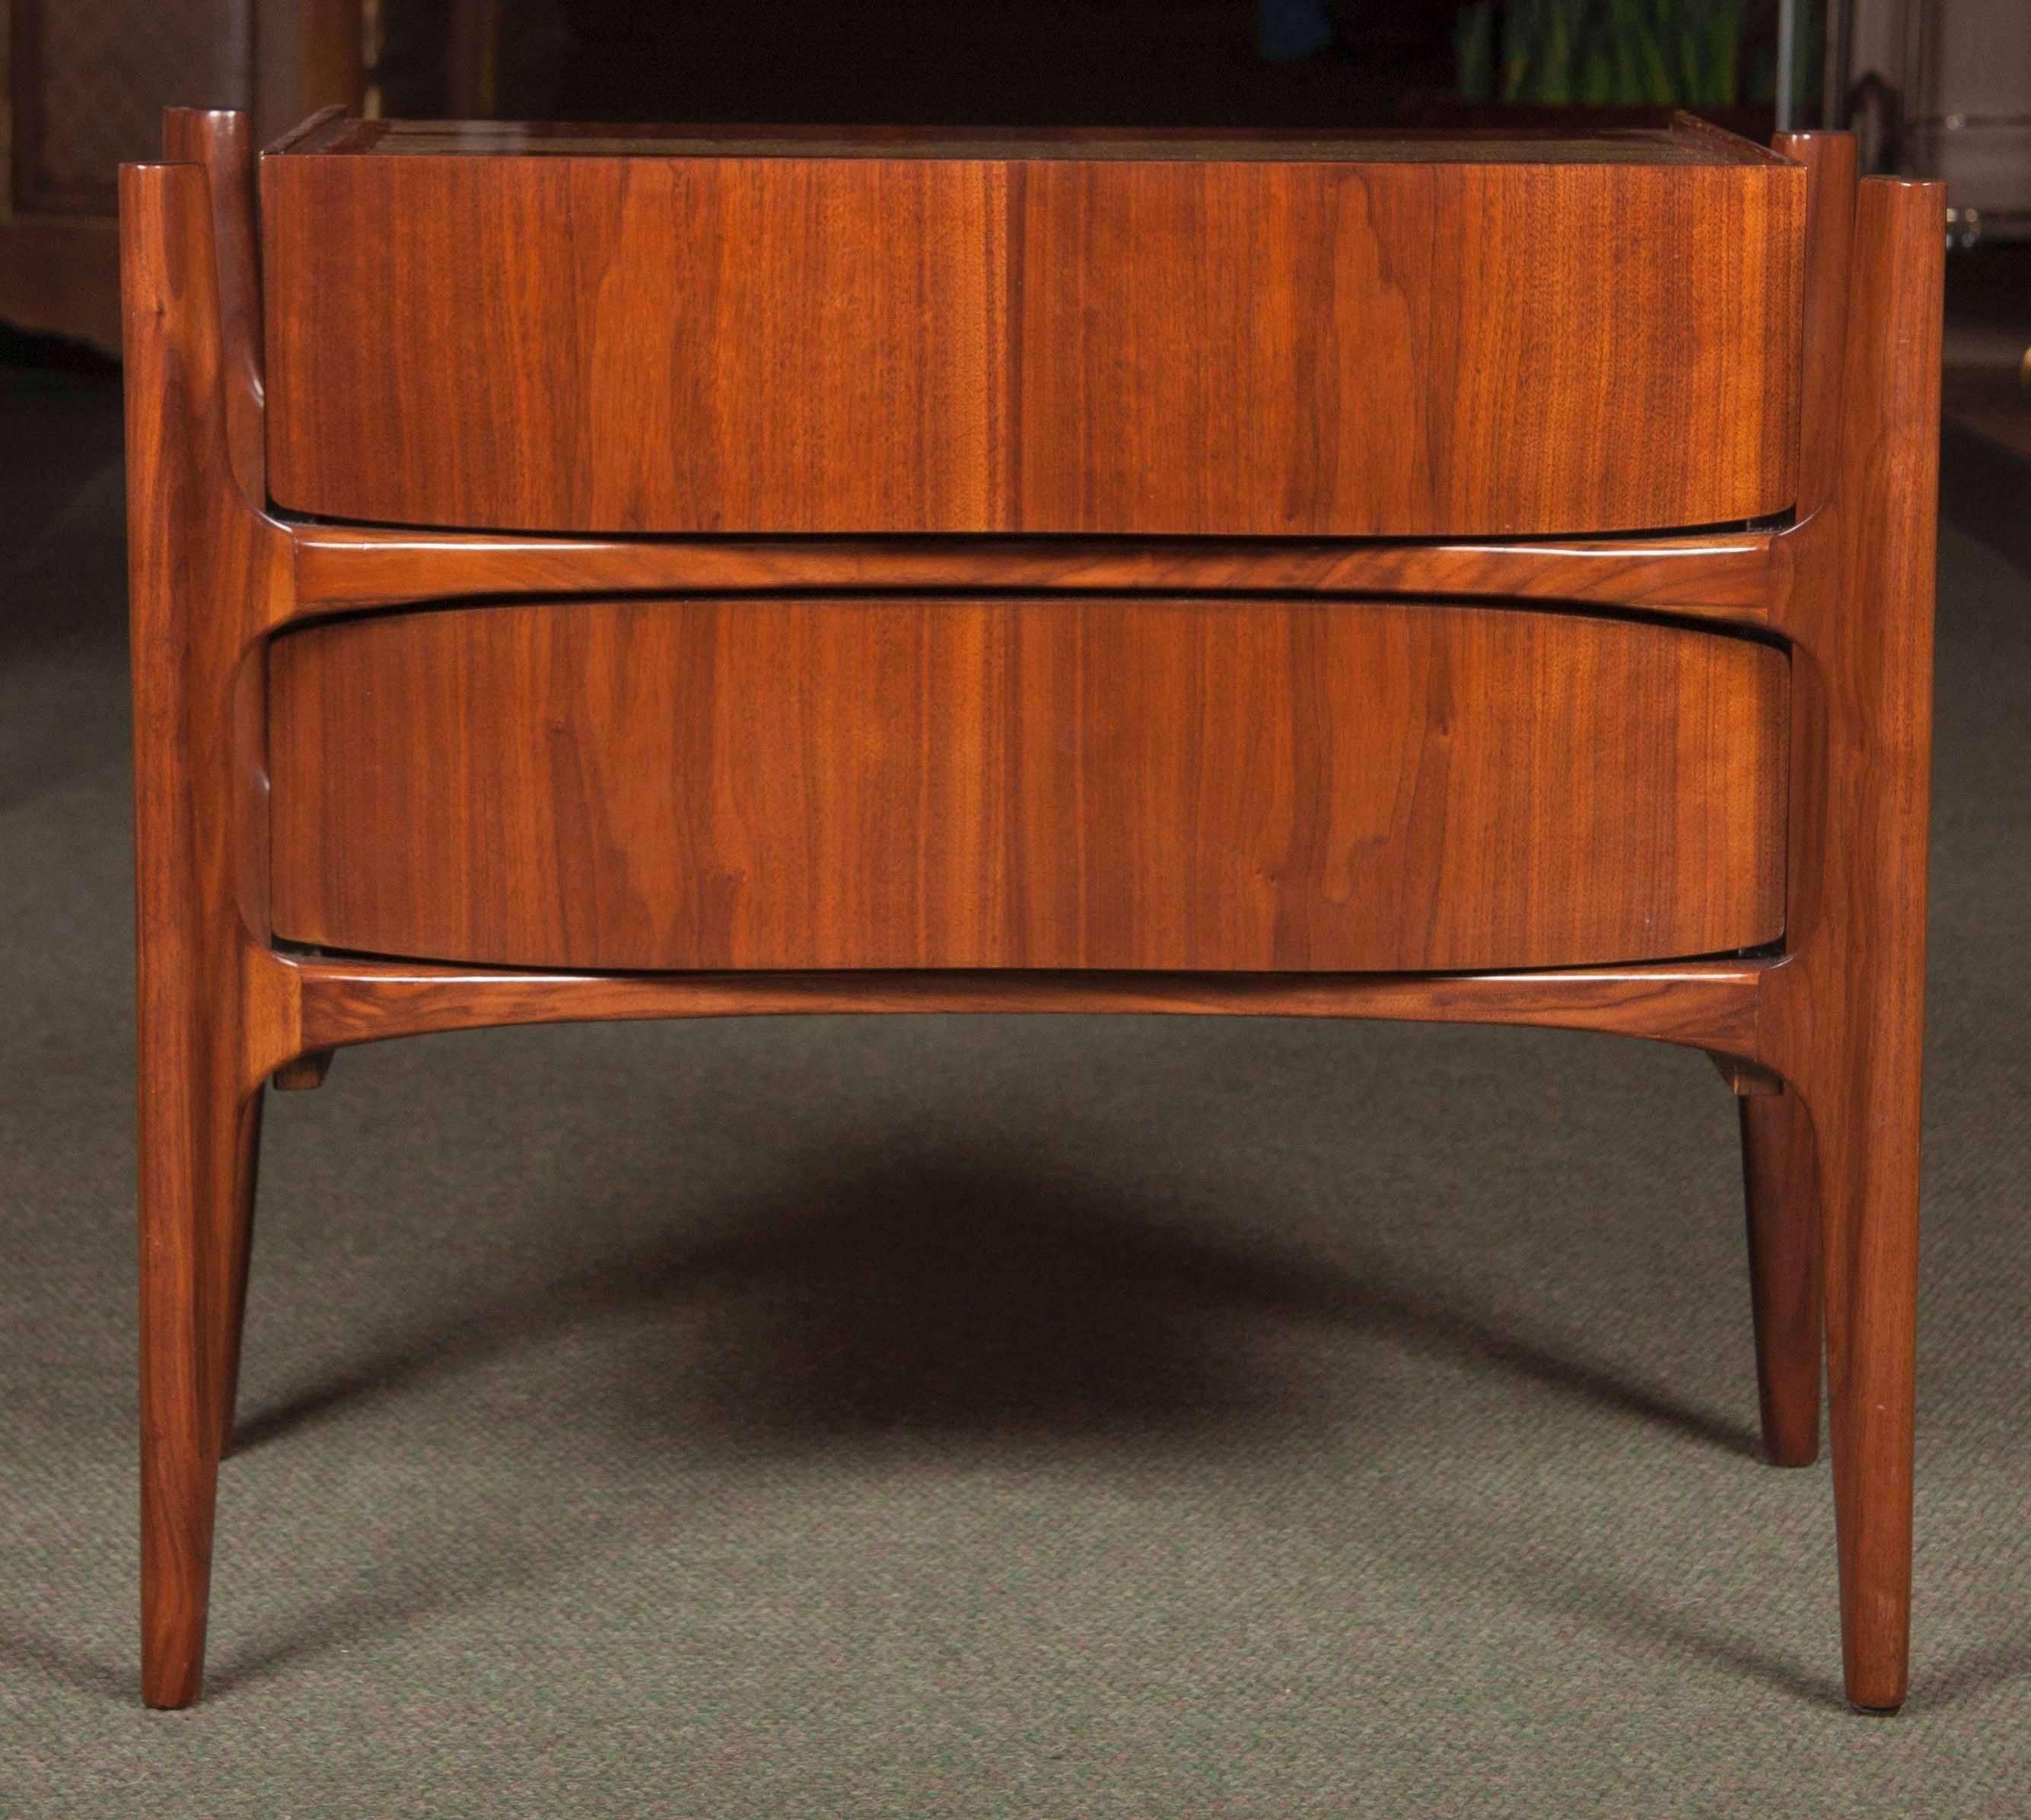 Swedish Pair of Bedside Tables by Edmond Spence